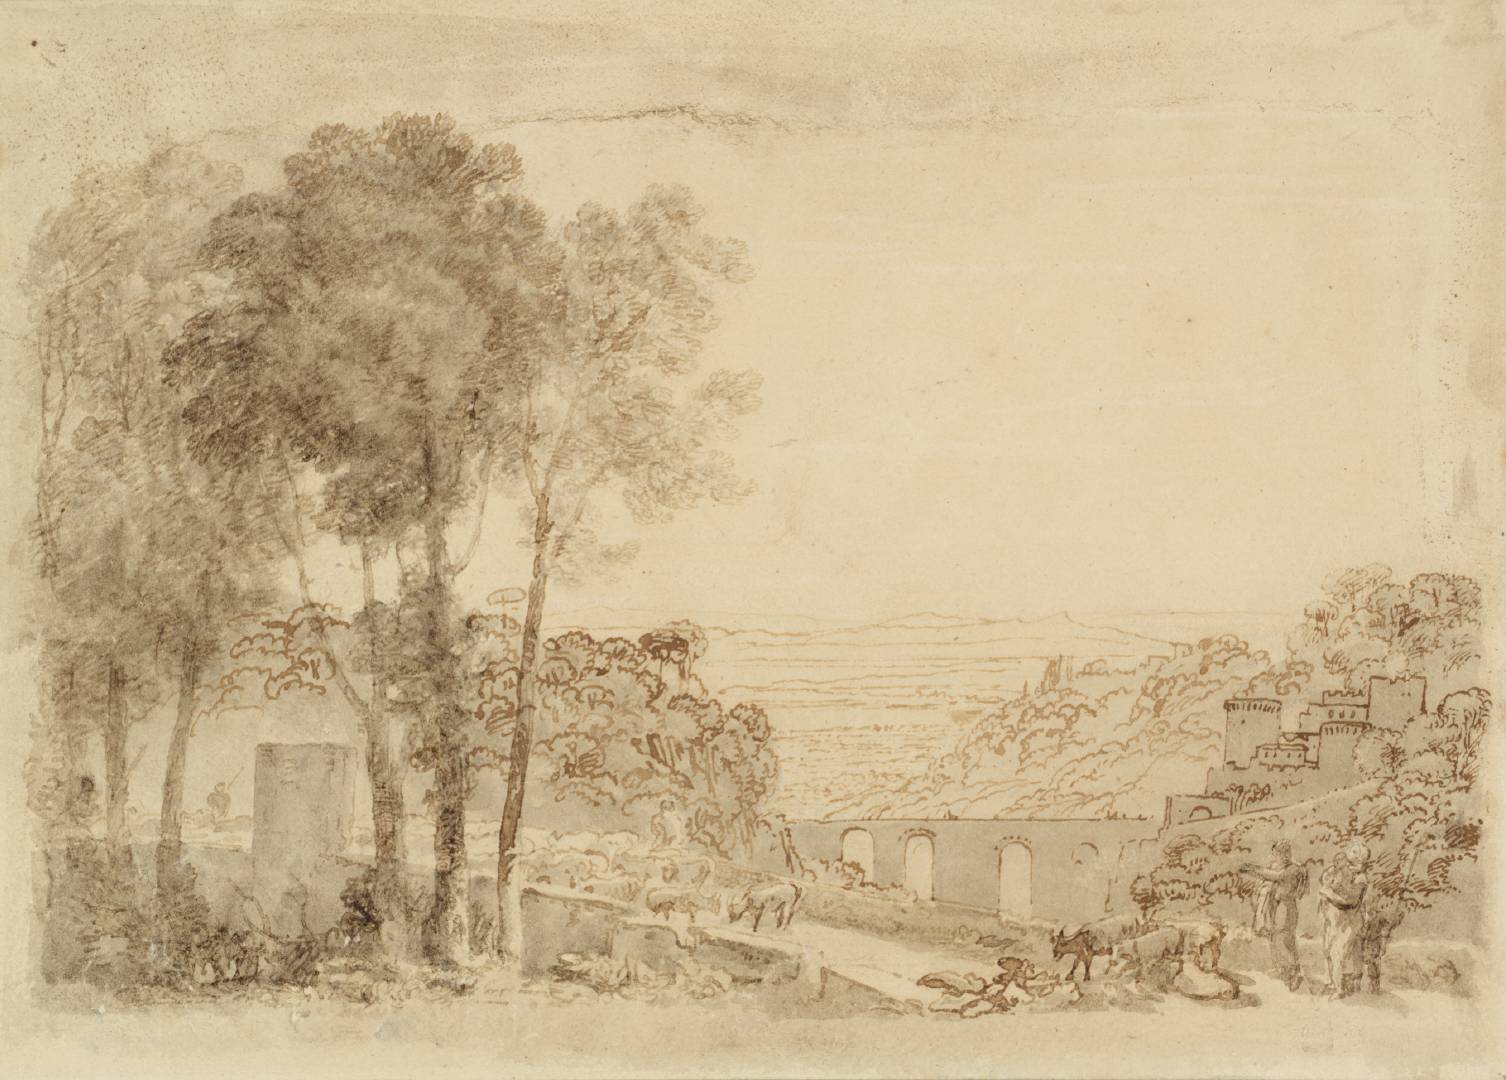 i>from</i> Bristol and Malmesbury Sketchbook [Finberg VI], Studies of a  Porch and Decorated Moulding, Joseph Mallord William Turner, 1791